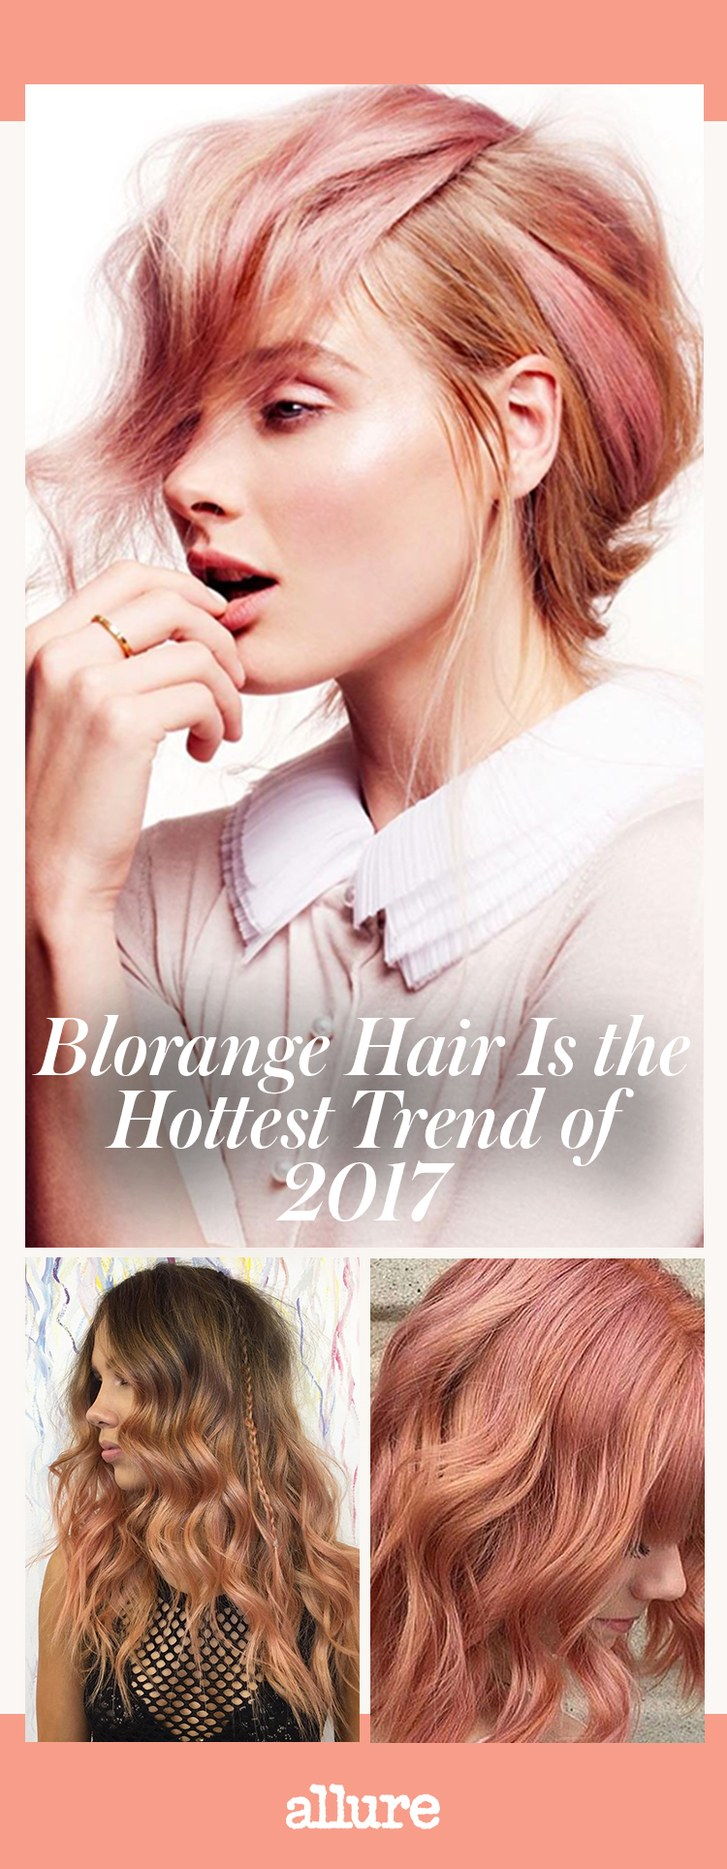 Blorange Hair Is the Hottest Trend of 2023—So Far